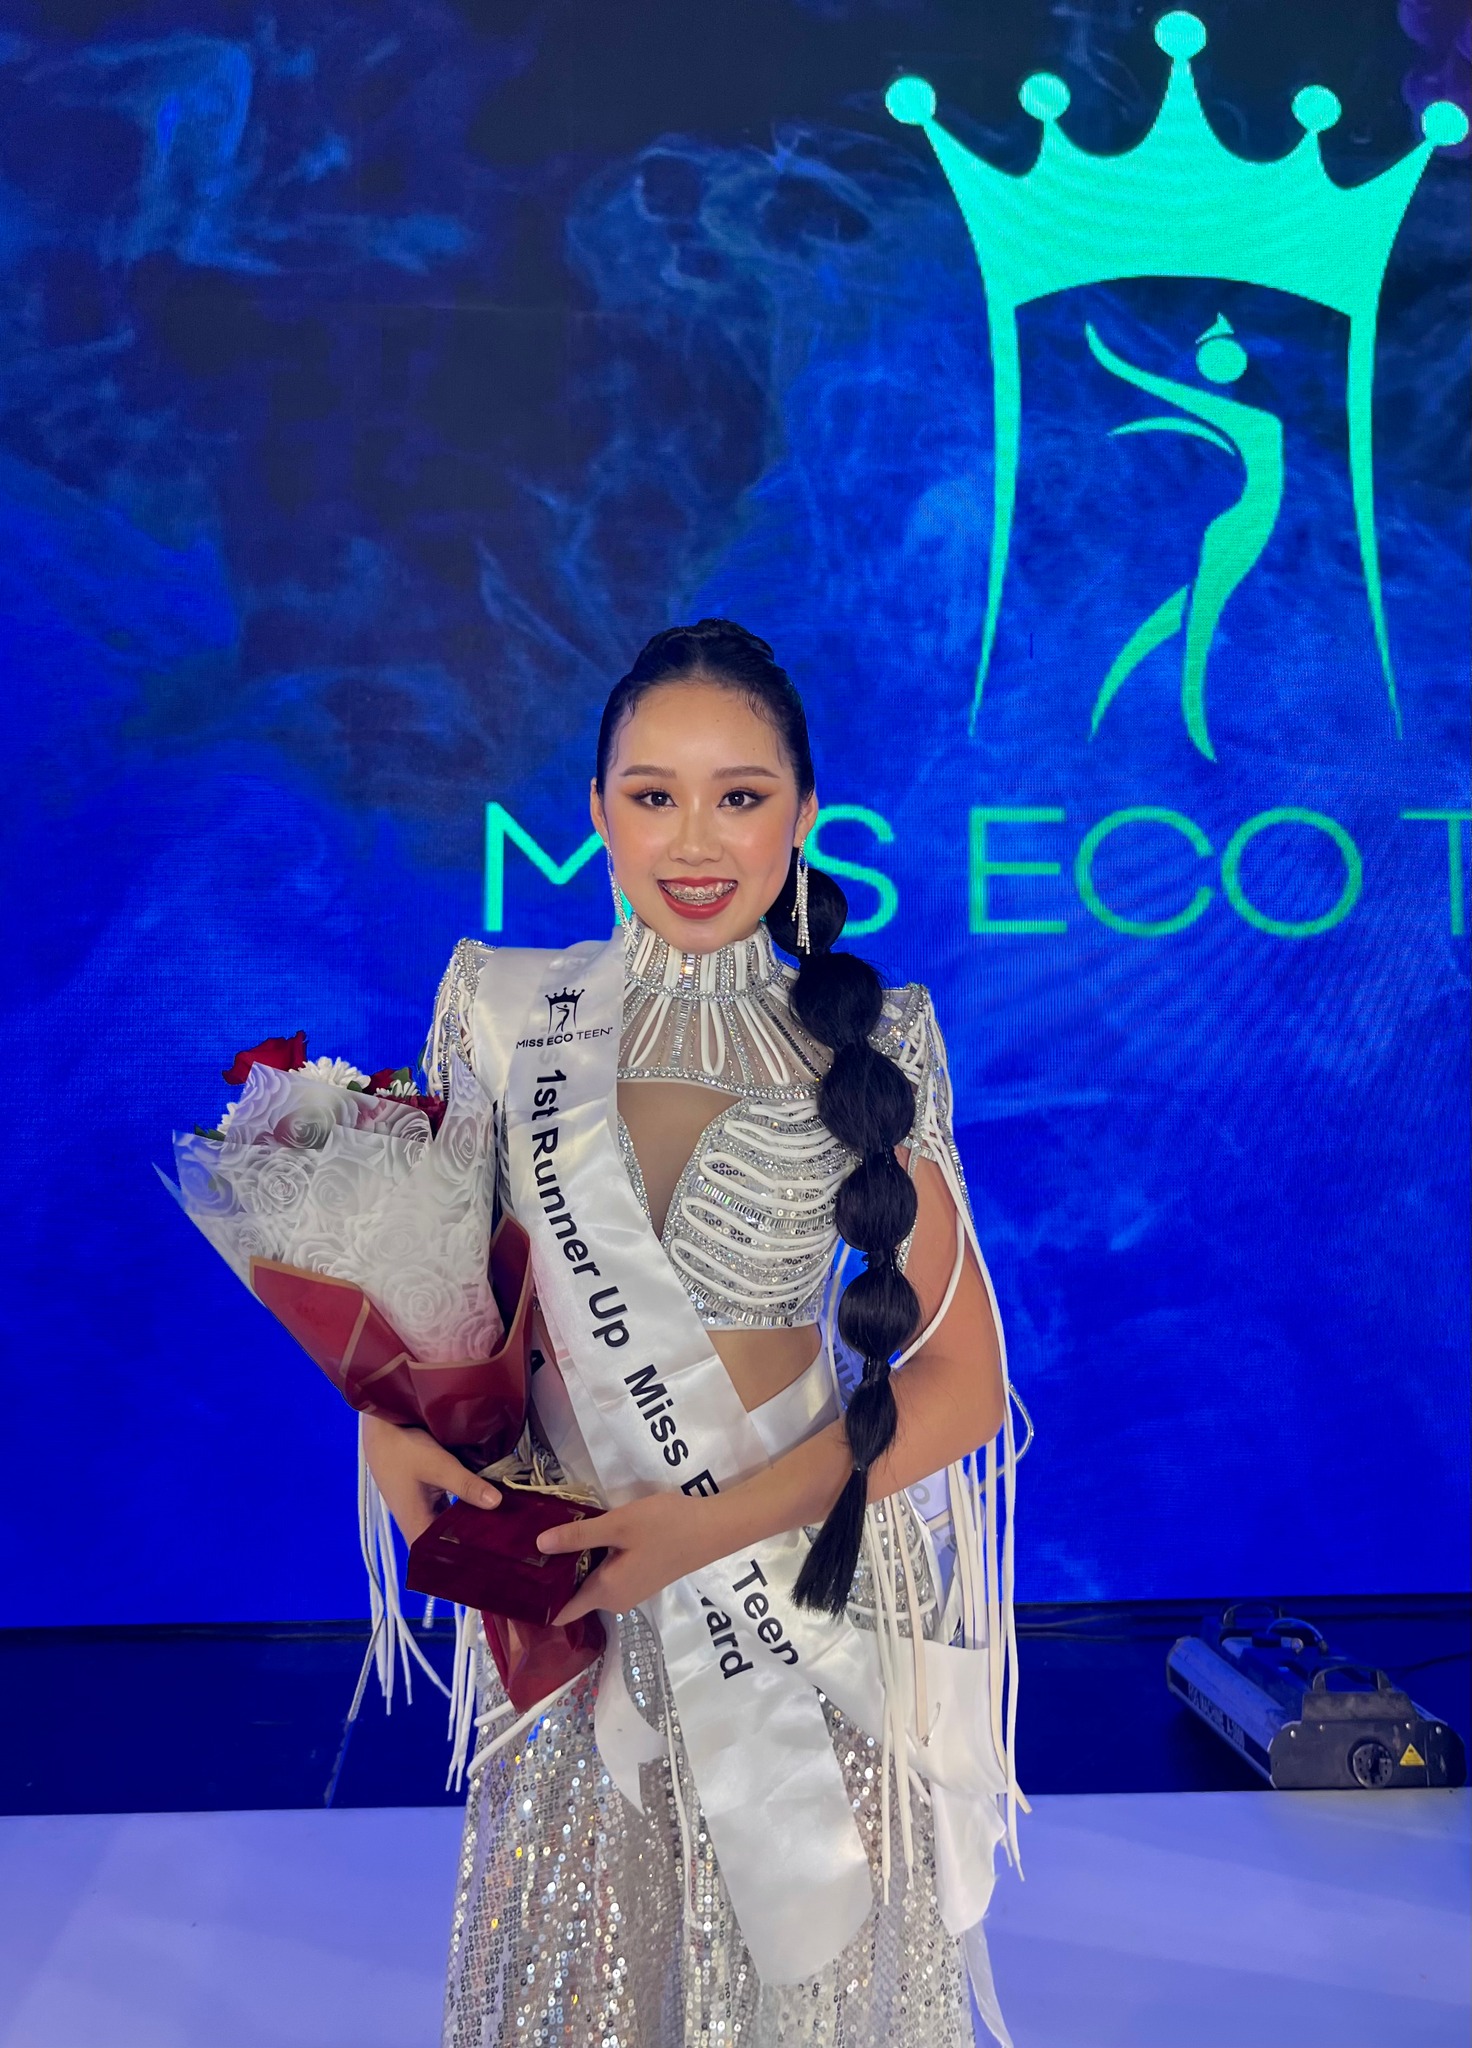 Vietnam's 14-year-old female student representative was crowned Miss Eco Teen runner-up in Egypt - Photo 12.